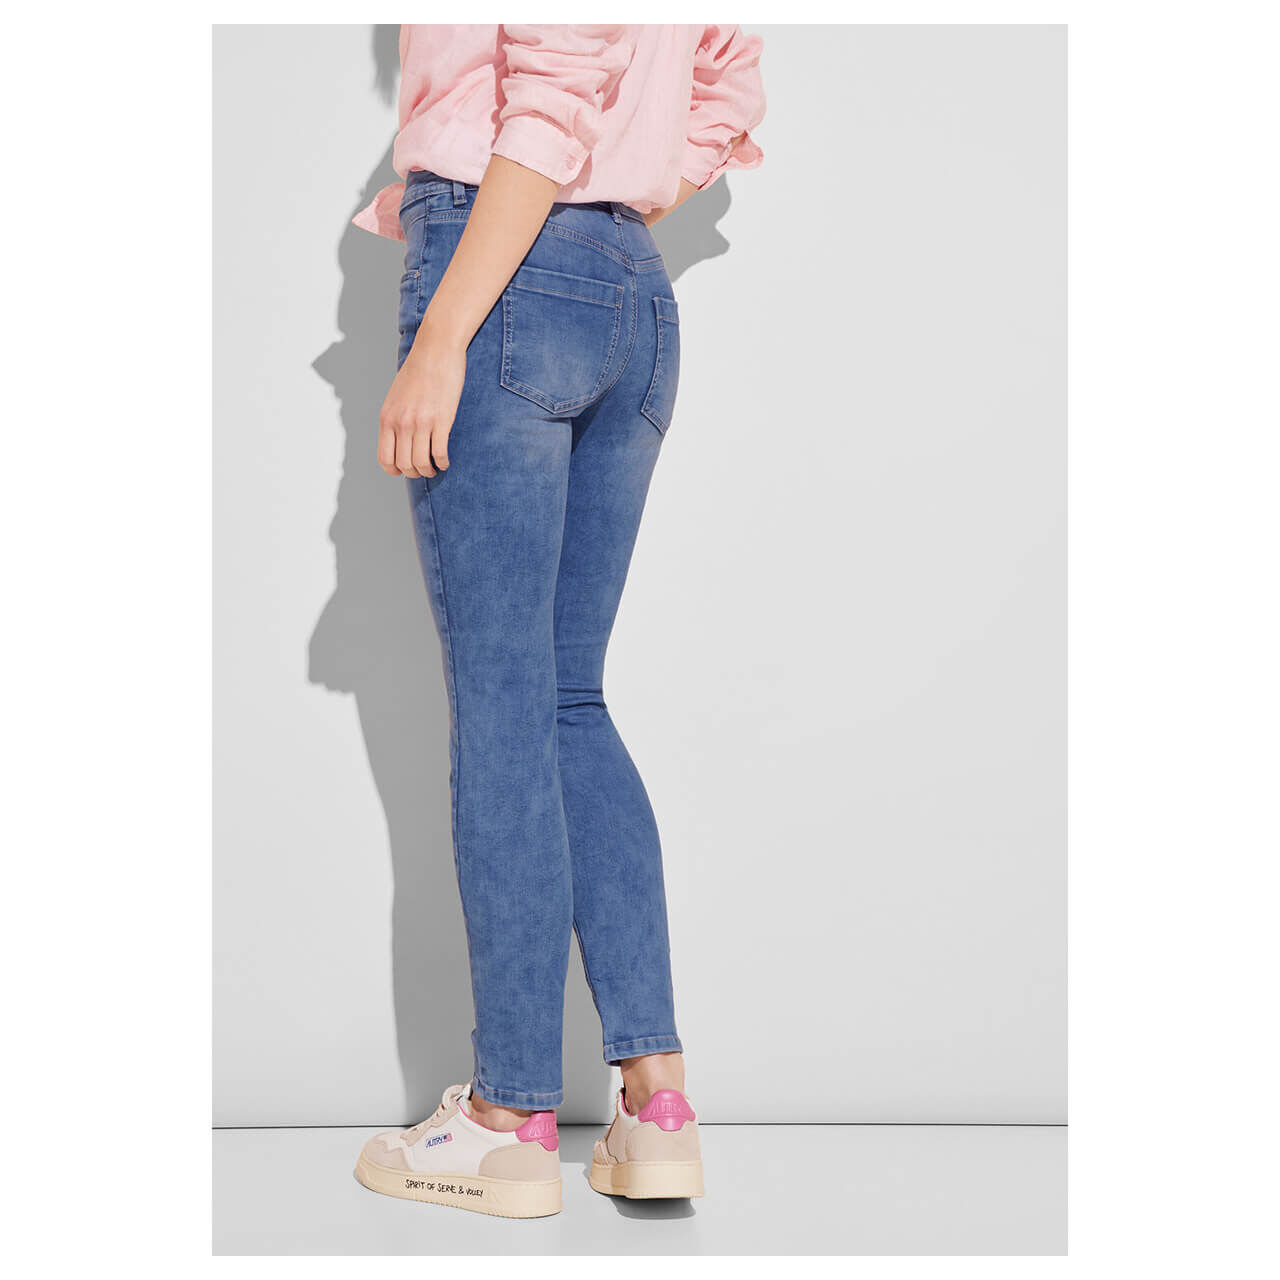 Street One York Ankle Jeans light blue washed